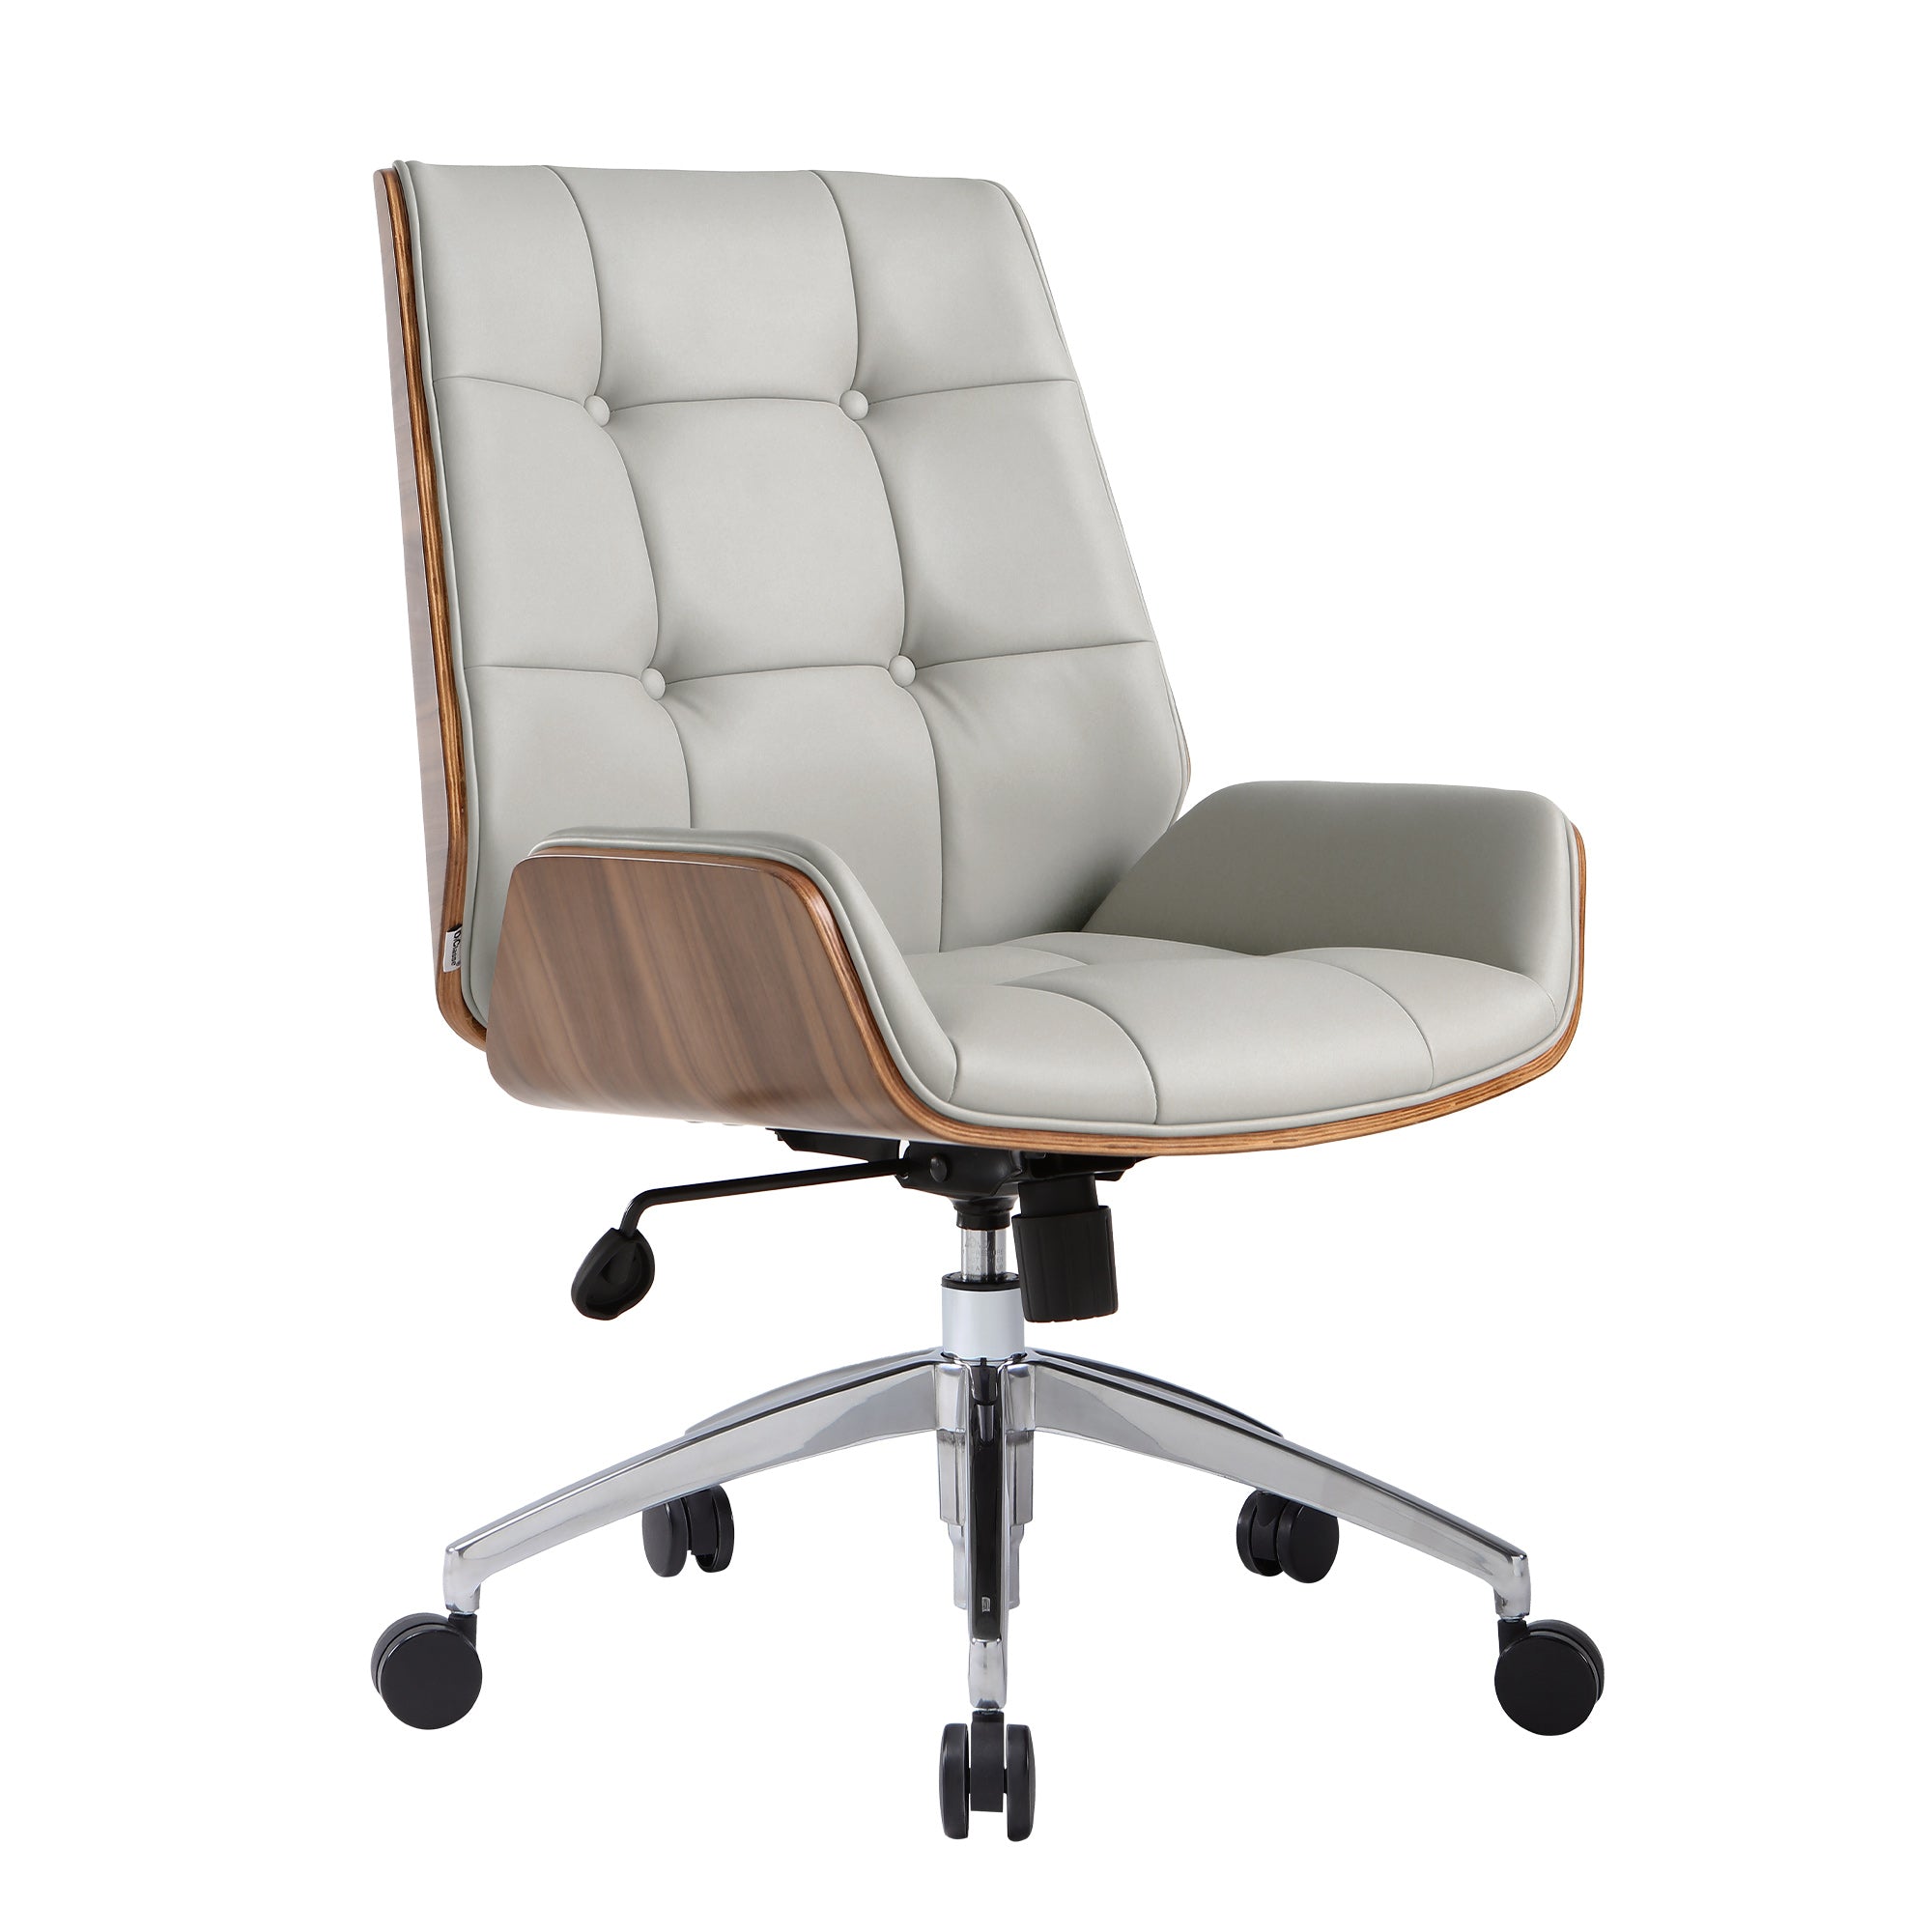 (Out of Stock) Executive Office Chair with Adjustable Height, Tilt Function, Solid Wood Arms and Base, 360° Swivel - Leather Office Chair for Office and Home Work in Grey